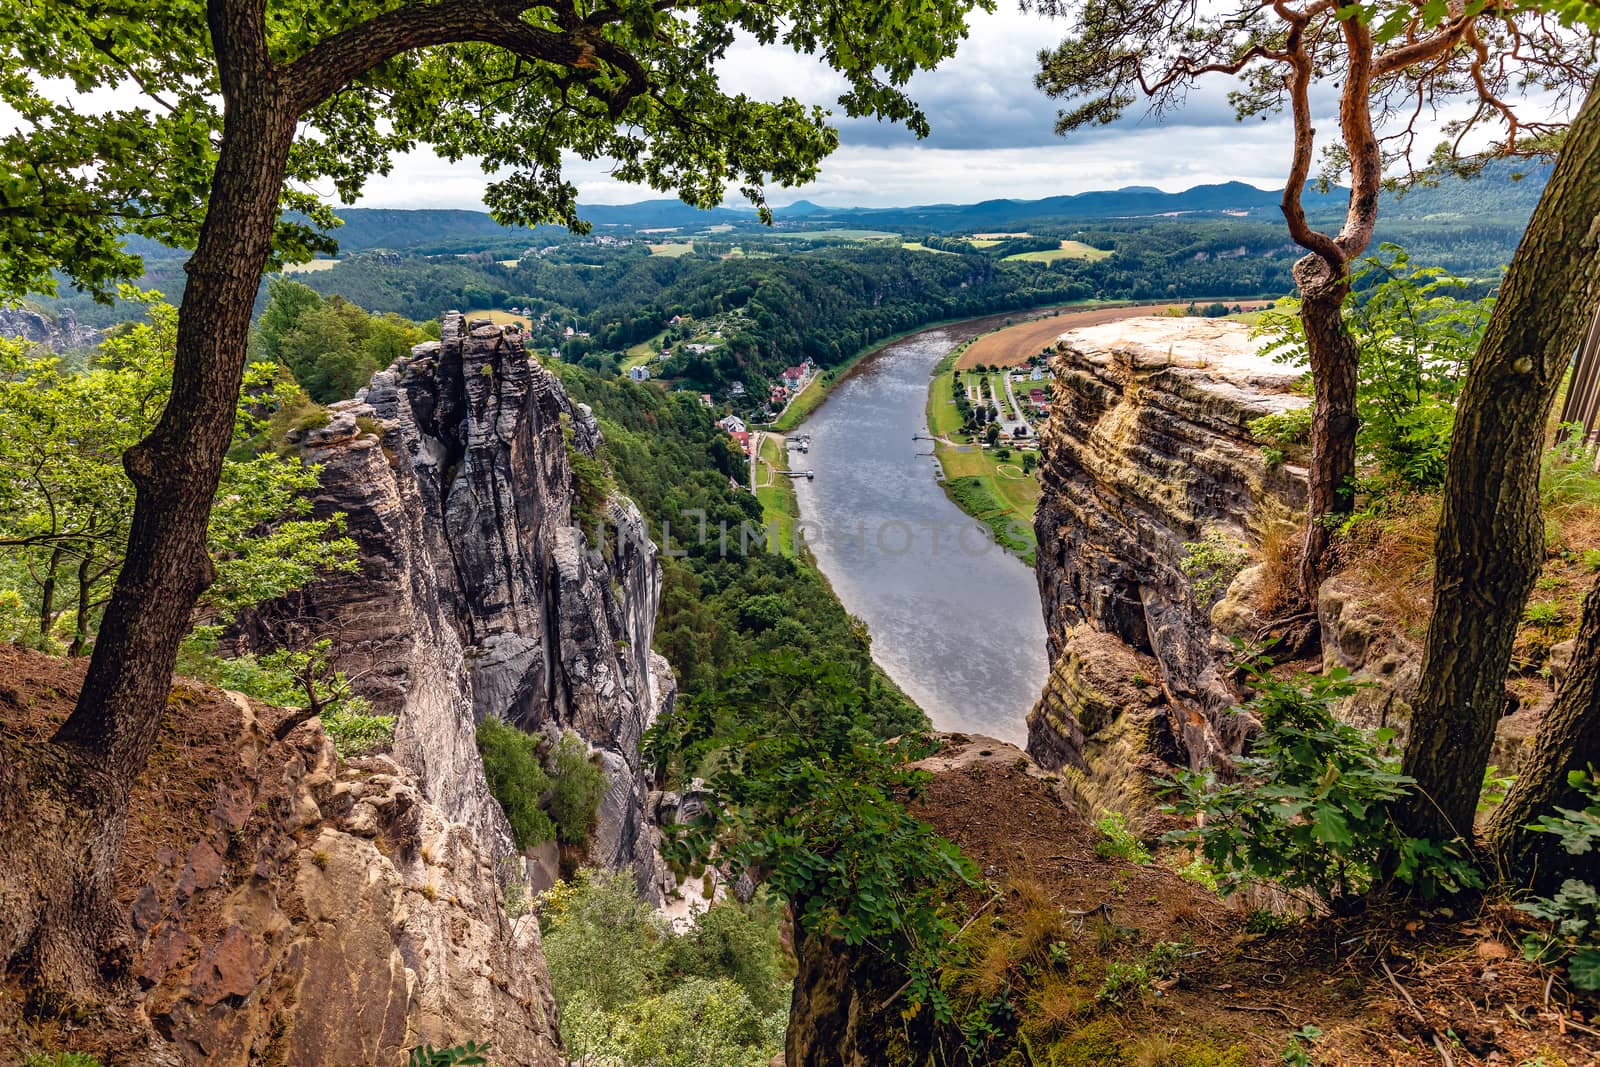 View of the Elbe valley from the Bastei mountains.